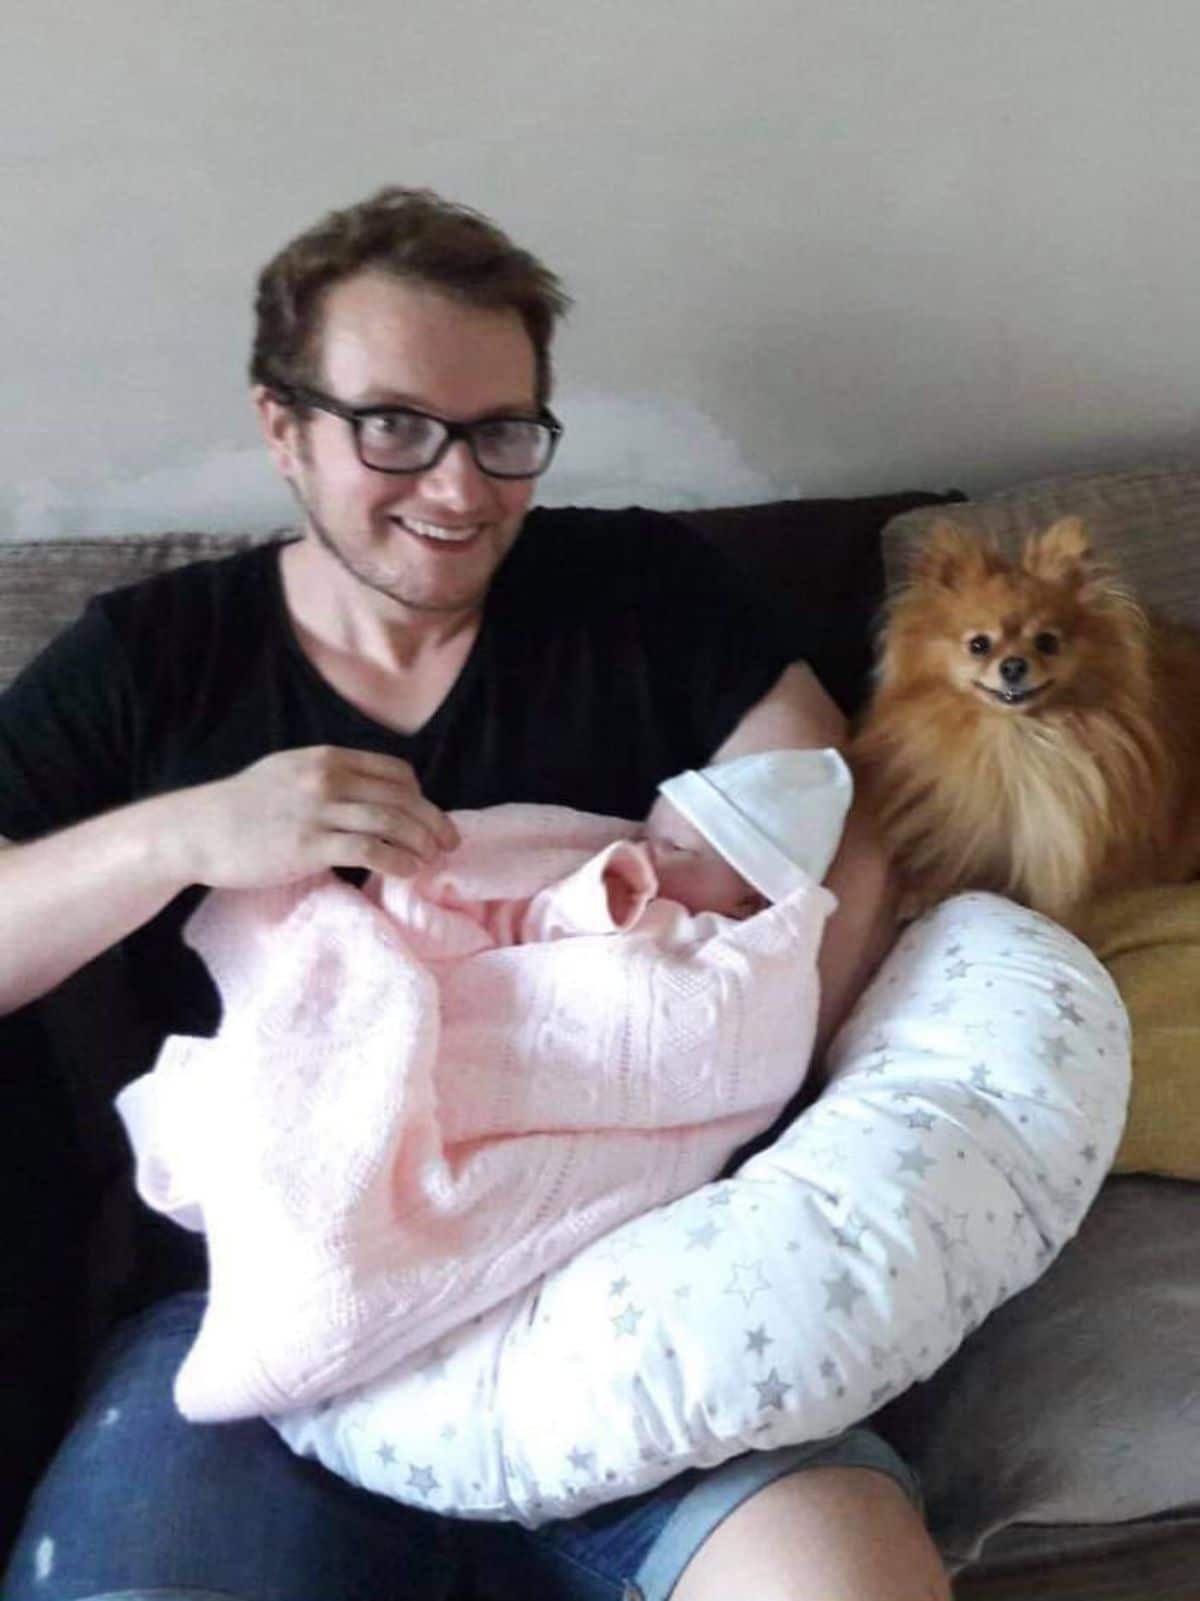 smiling fluffy brown pomeranian sitting next to a man holding a baby in his arms